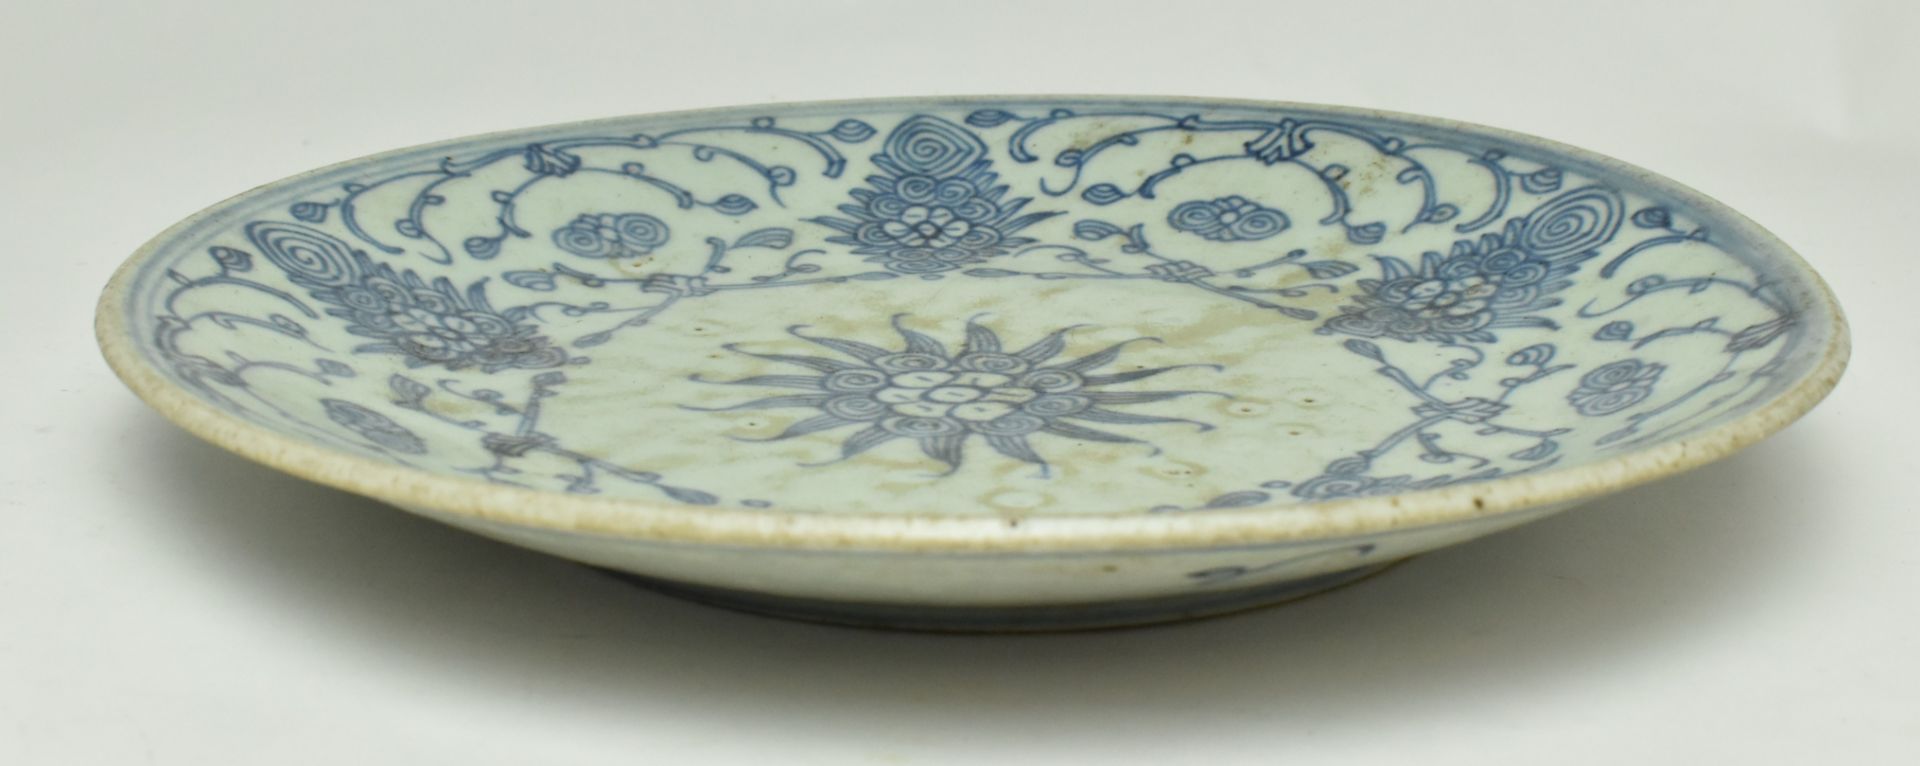 QING DAOGUANG PERIOD BLUE AND WHITE PLATE 清 道光青花盘 - Image 7 of 7